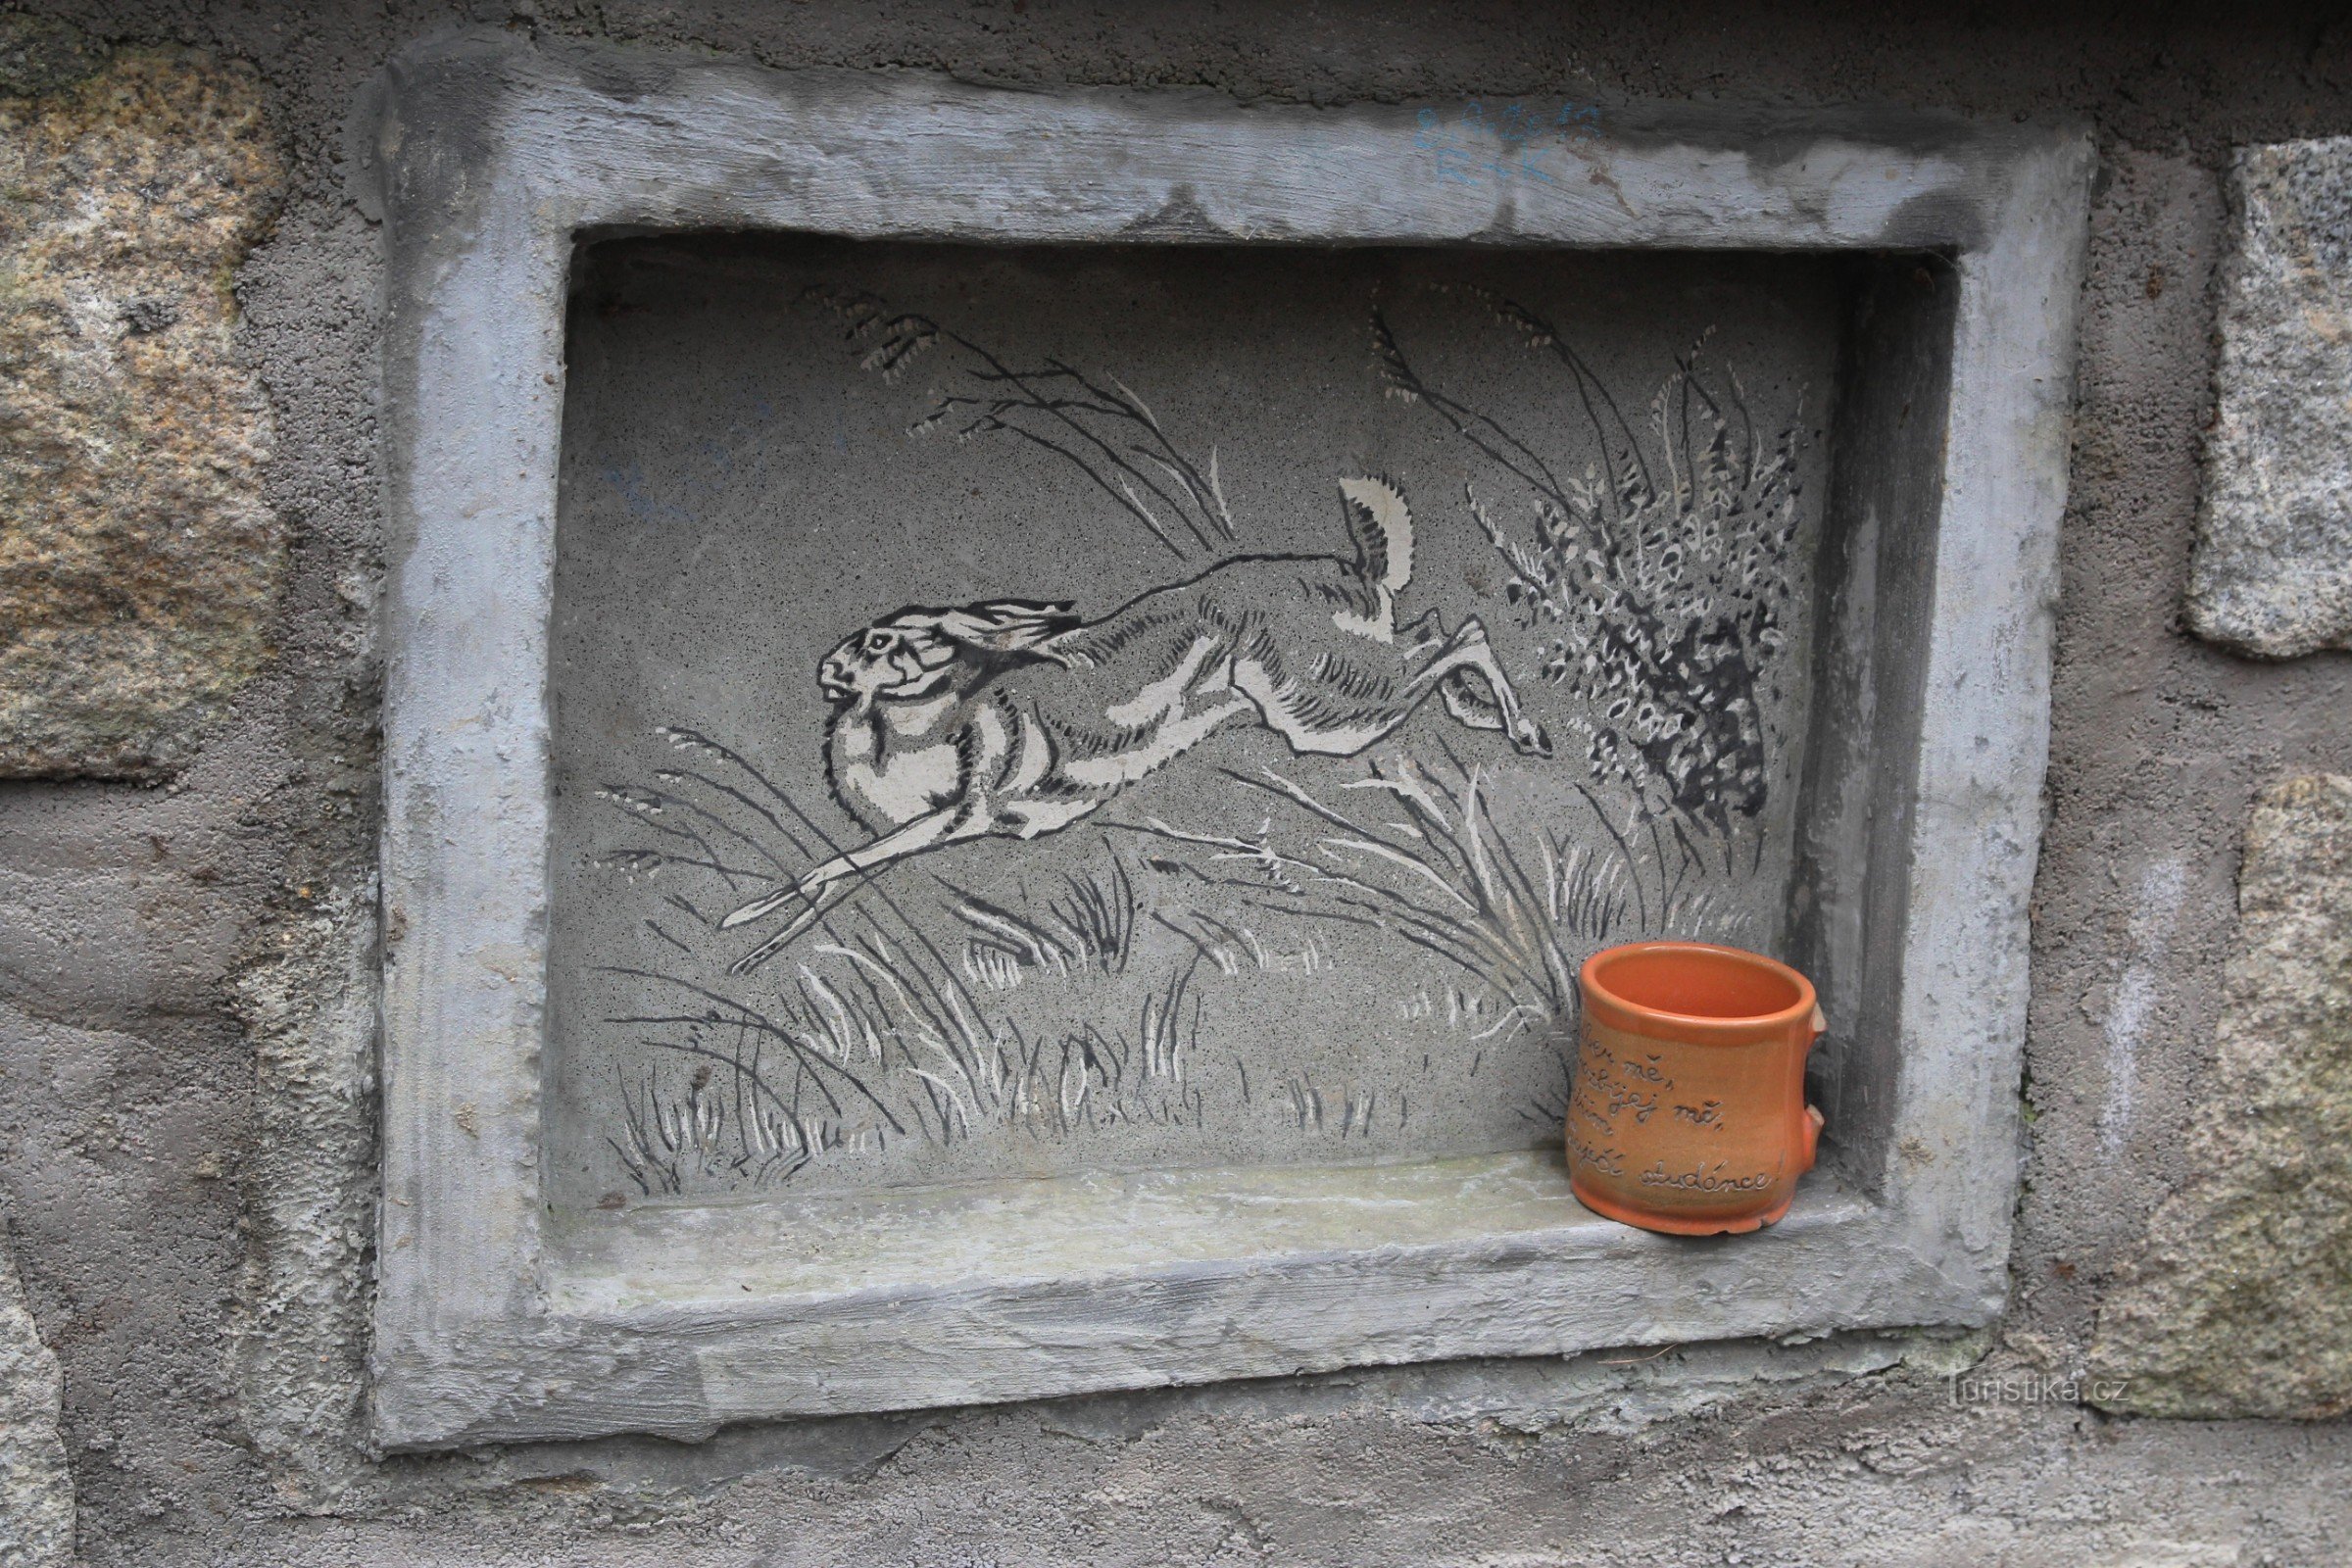 Detail of a well with a drawing of a hare